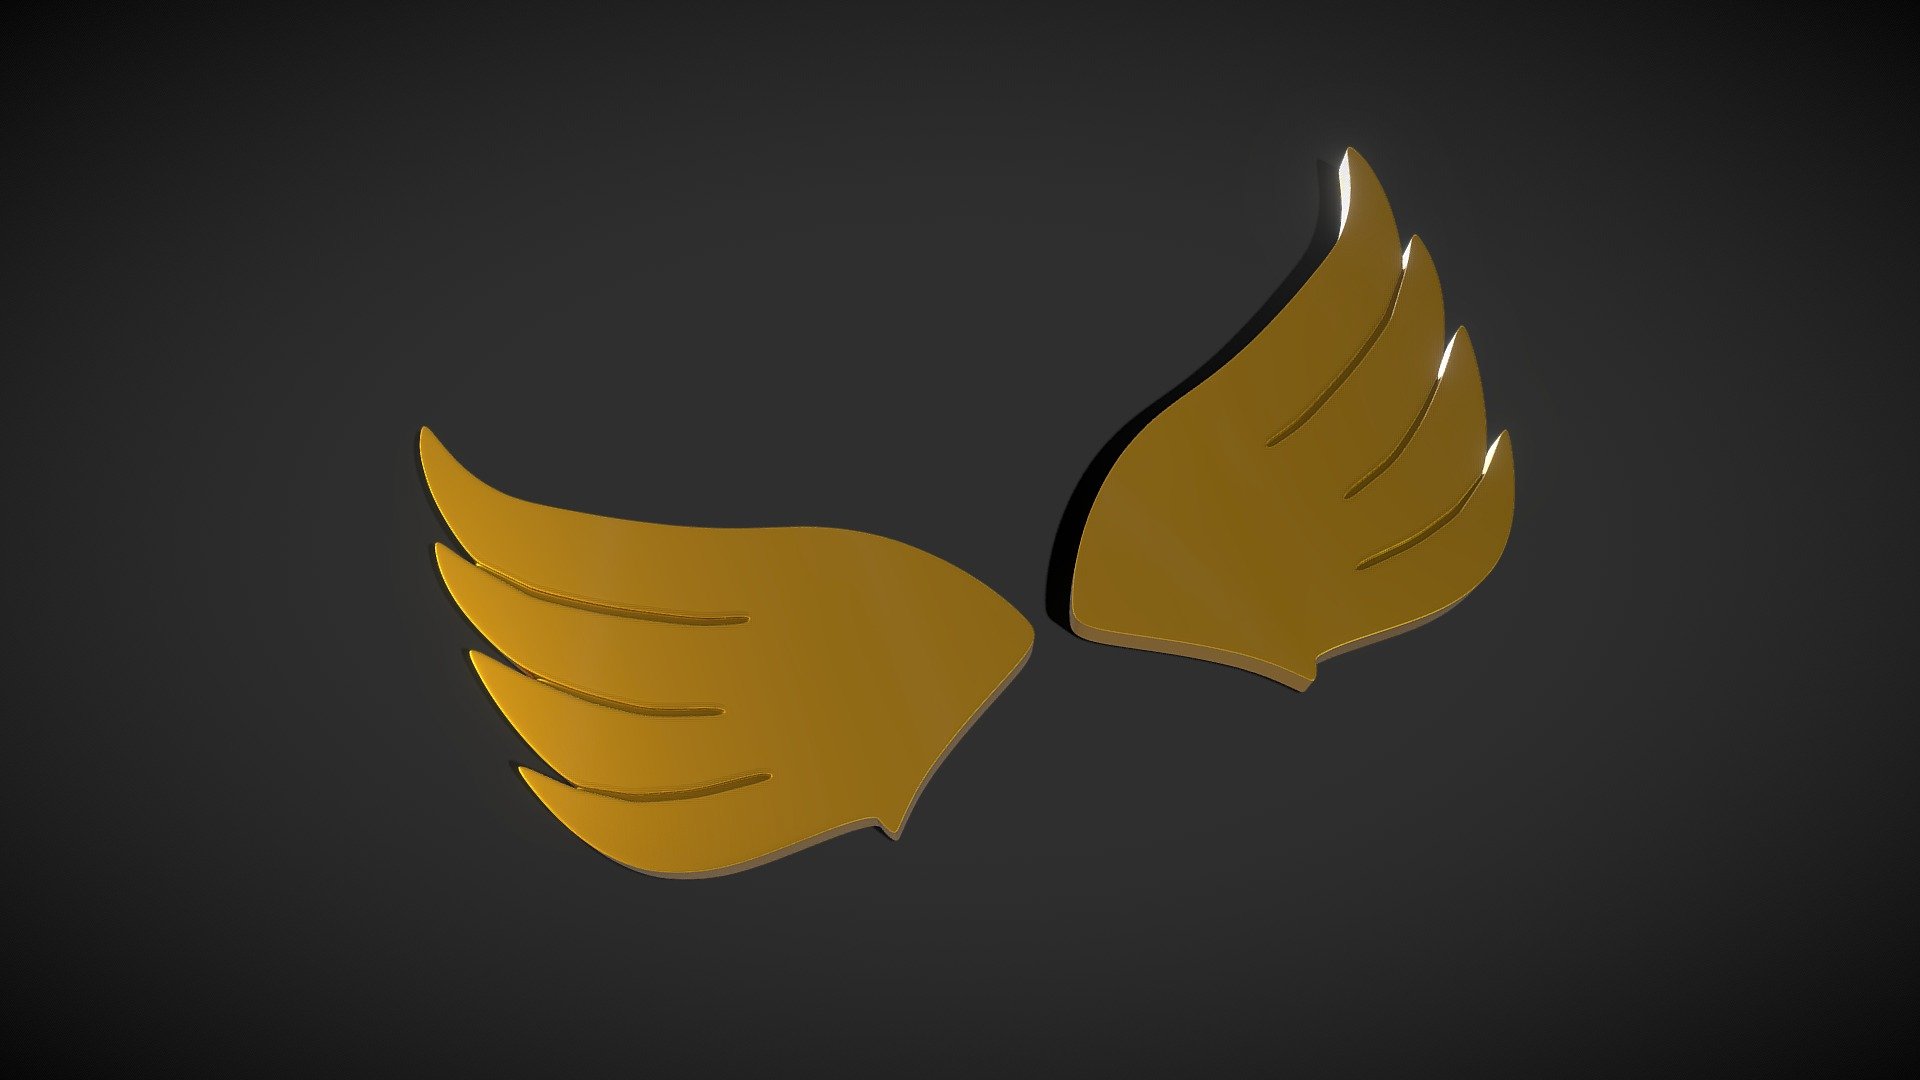 Wing Set modeled in 3ds max 2017 and rendered in keyshot 9.3 pro.

3D Printable Model.

Overall Object Size:-
Length : 3.2 Inches,
Width : 6.2 Inches,
Height : 0.3 Inches

Polys : 34112 and Verts : 34116 3d model